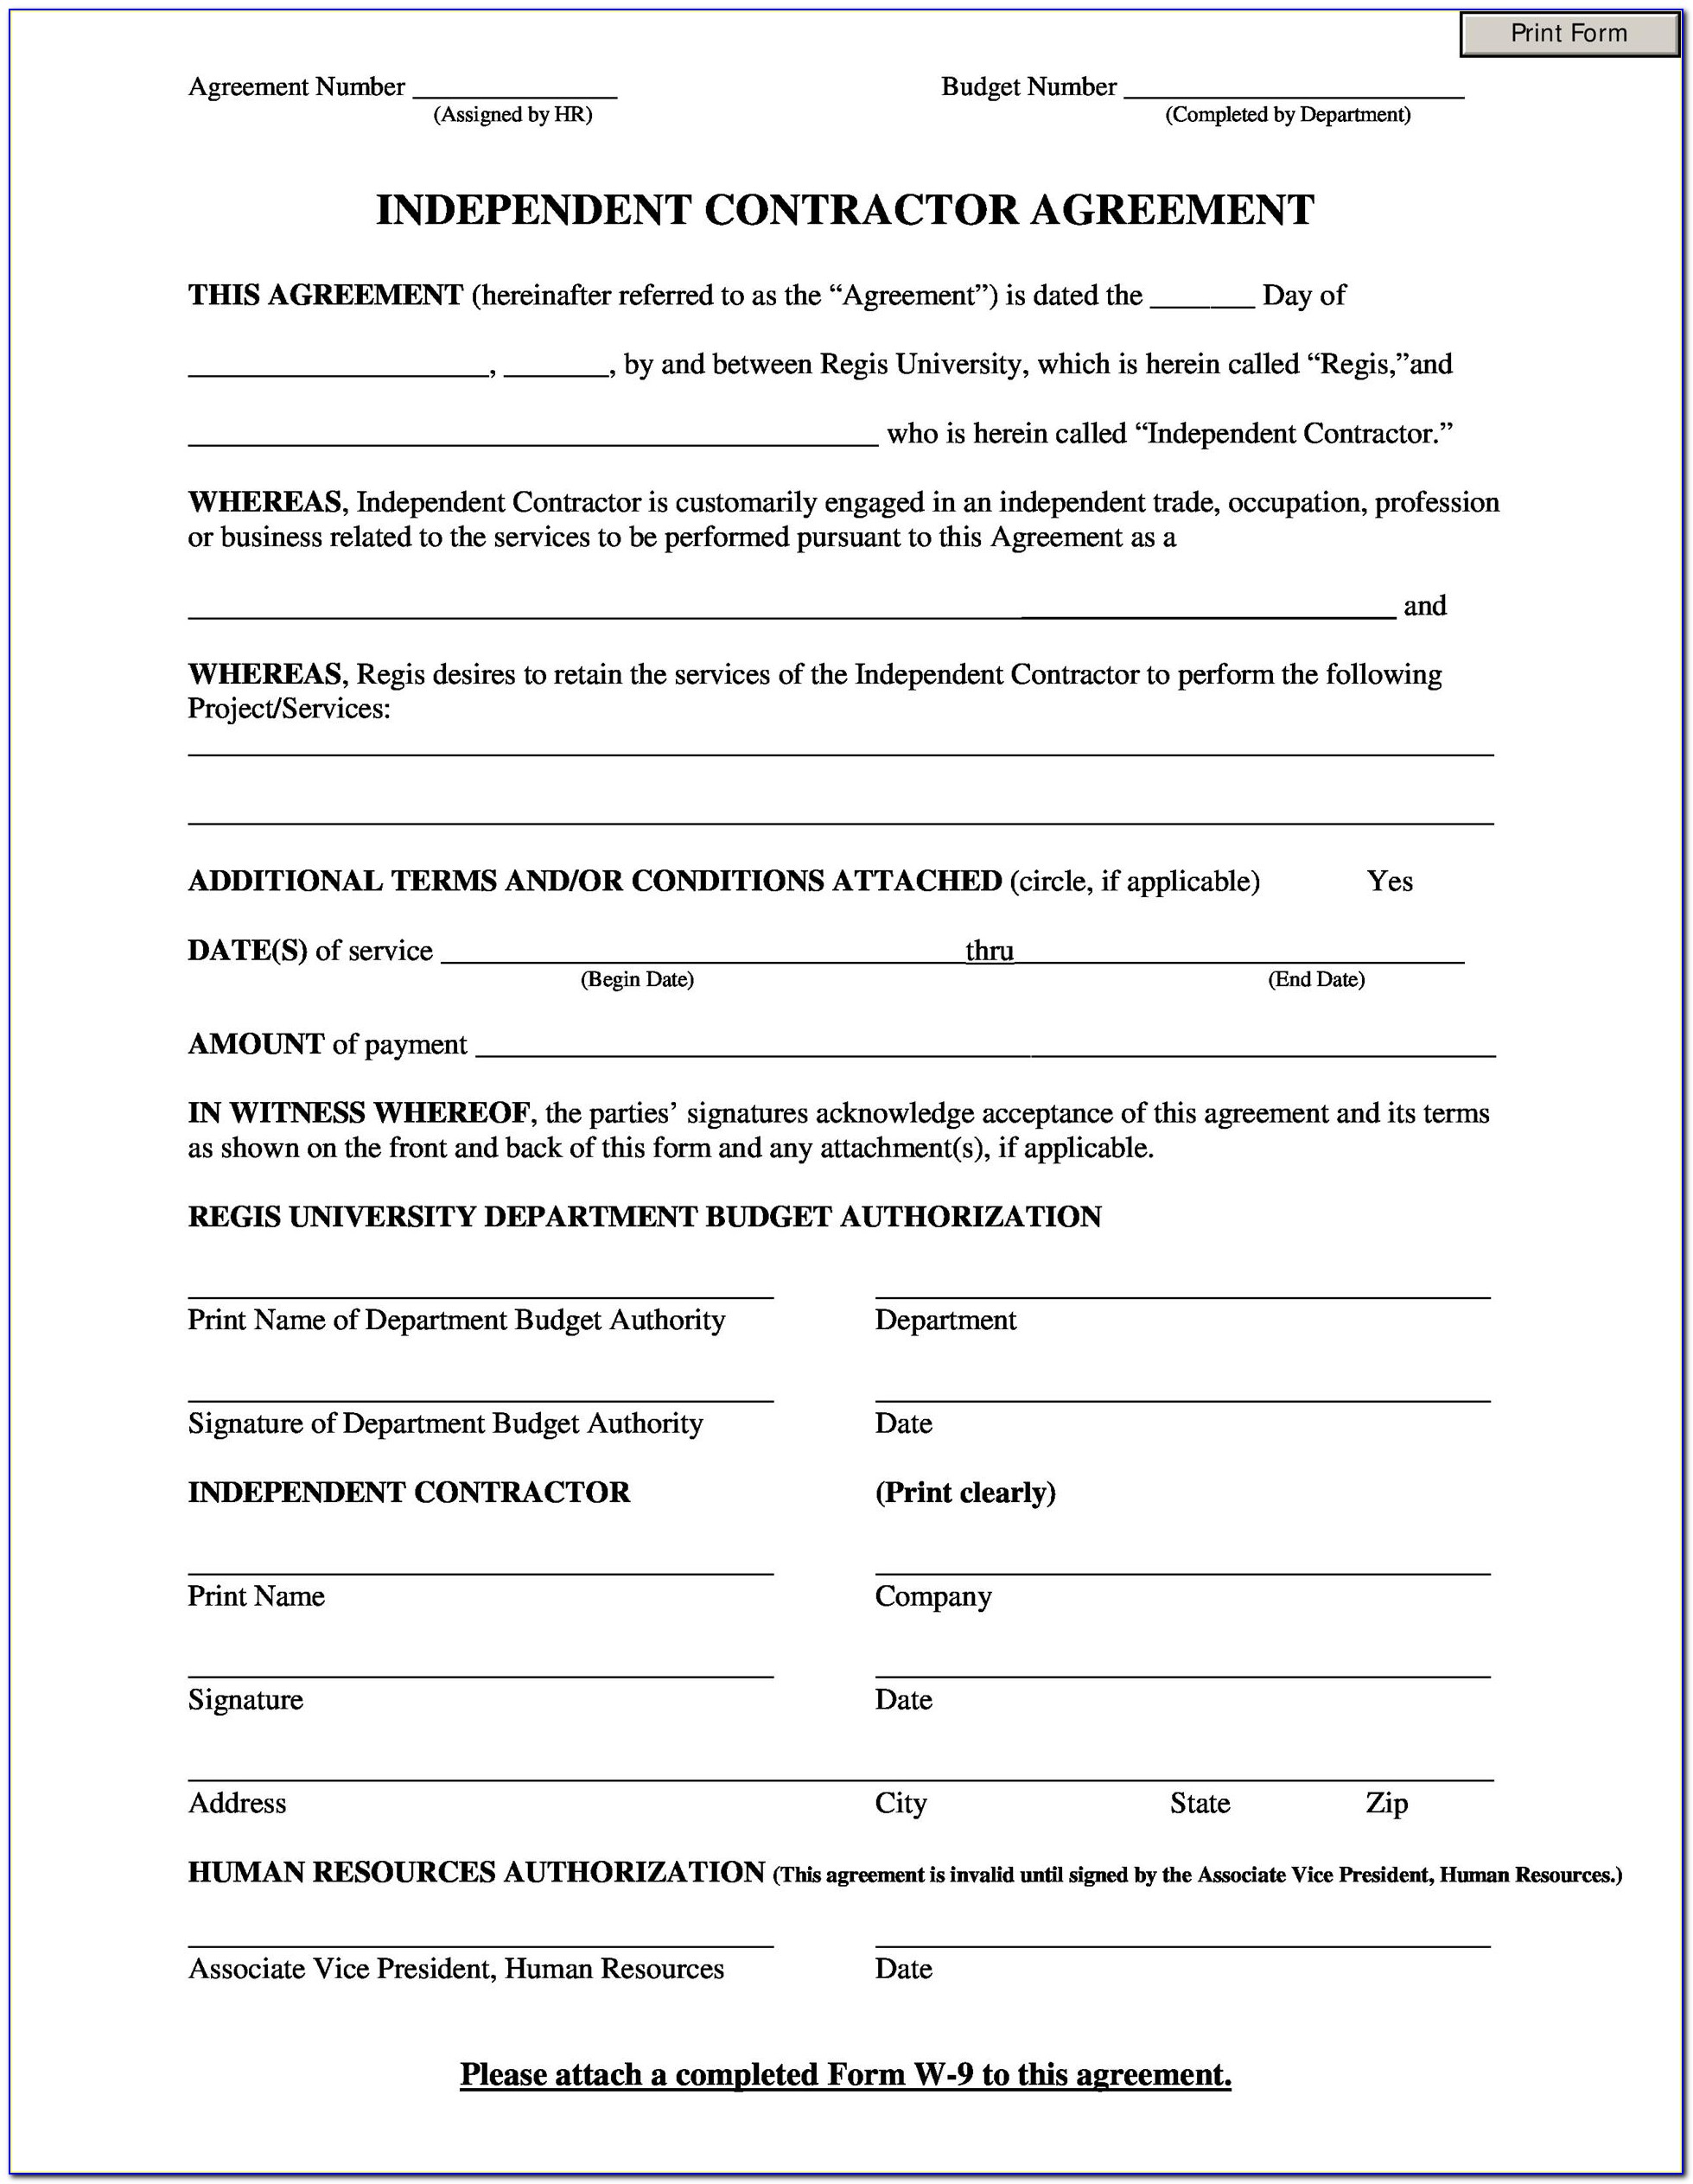 Independent Contractor Agreement Template Your State Here